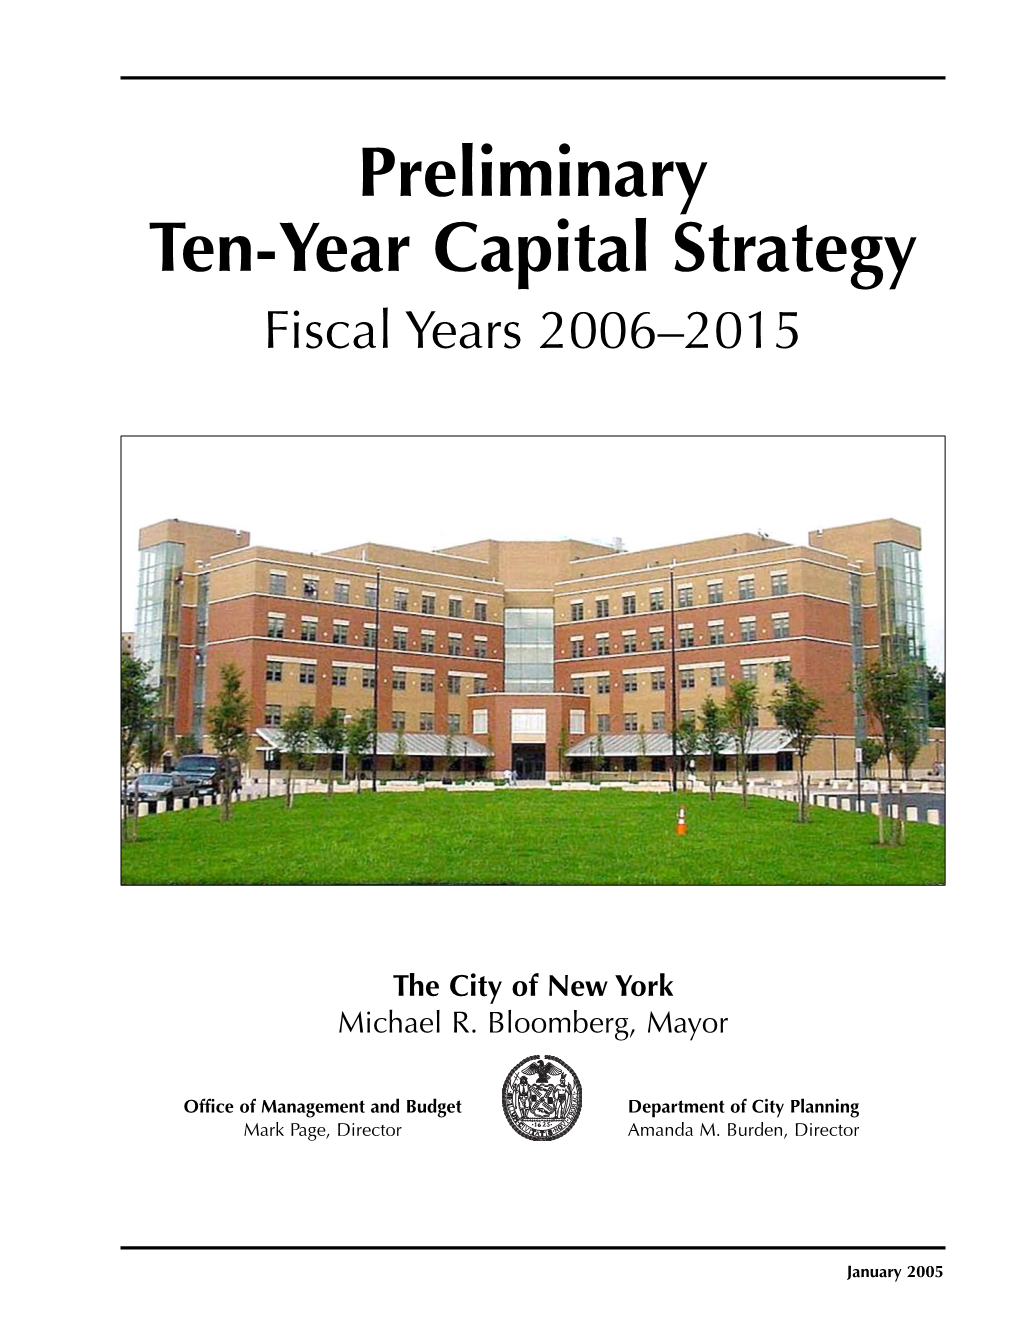 Preliminary Ten-Year Capital Strategy, Fiscal Years 2006-2015